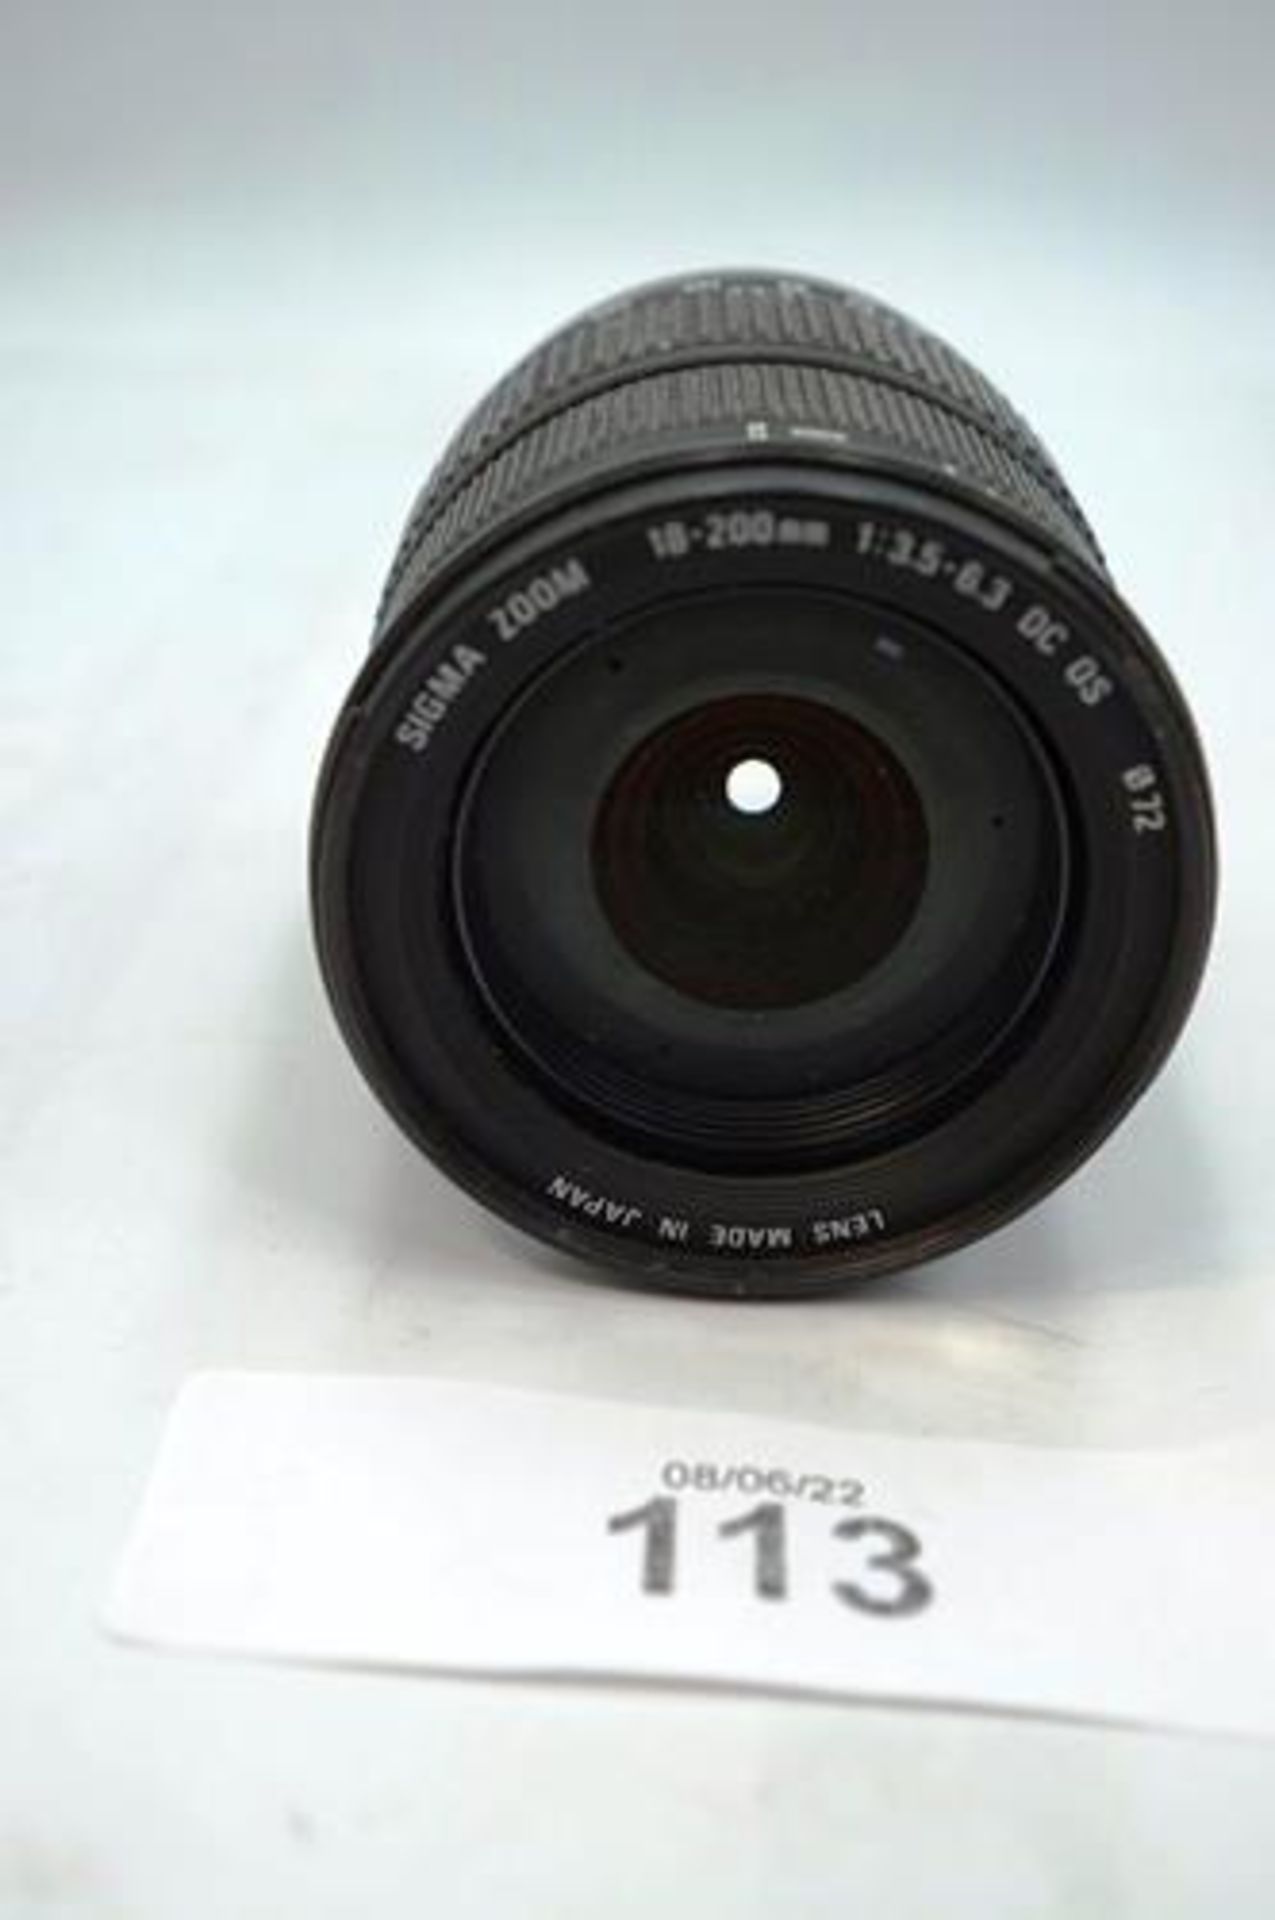 1 x Canon Sigma DC 18-200mm, 1:3.5 - 6.3 camera lens - Second-hand, tested working (Cab1)